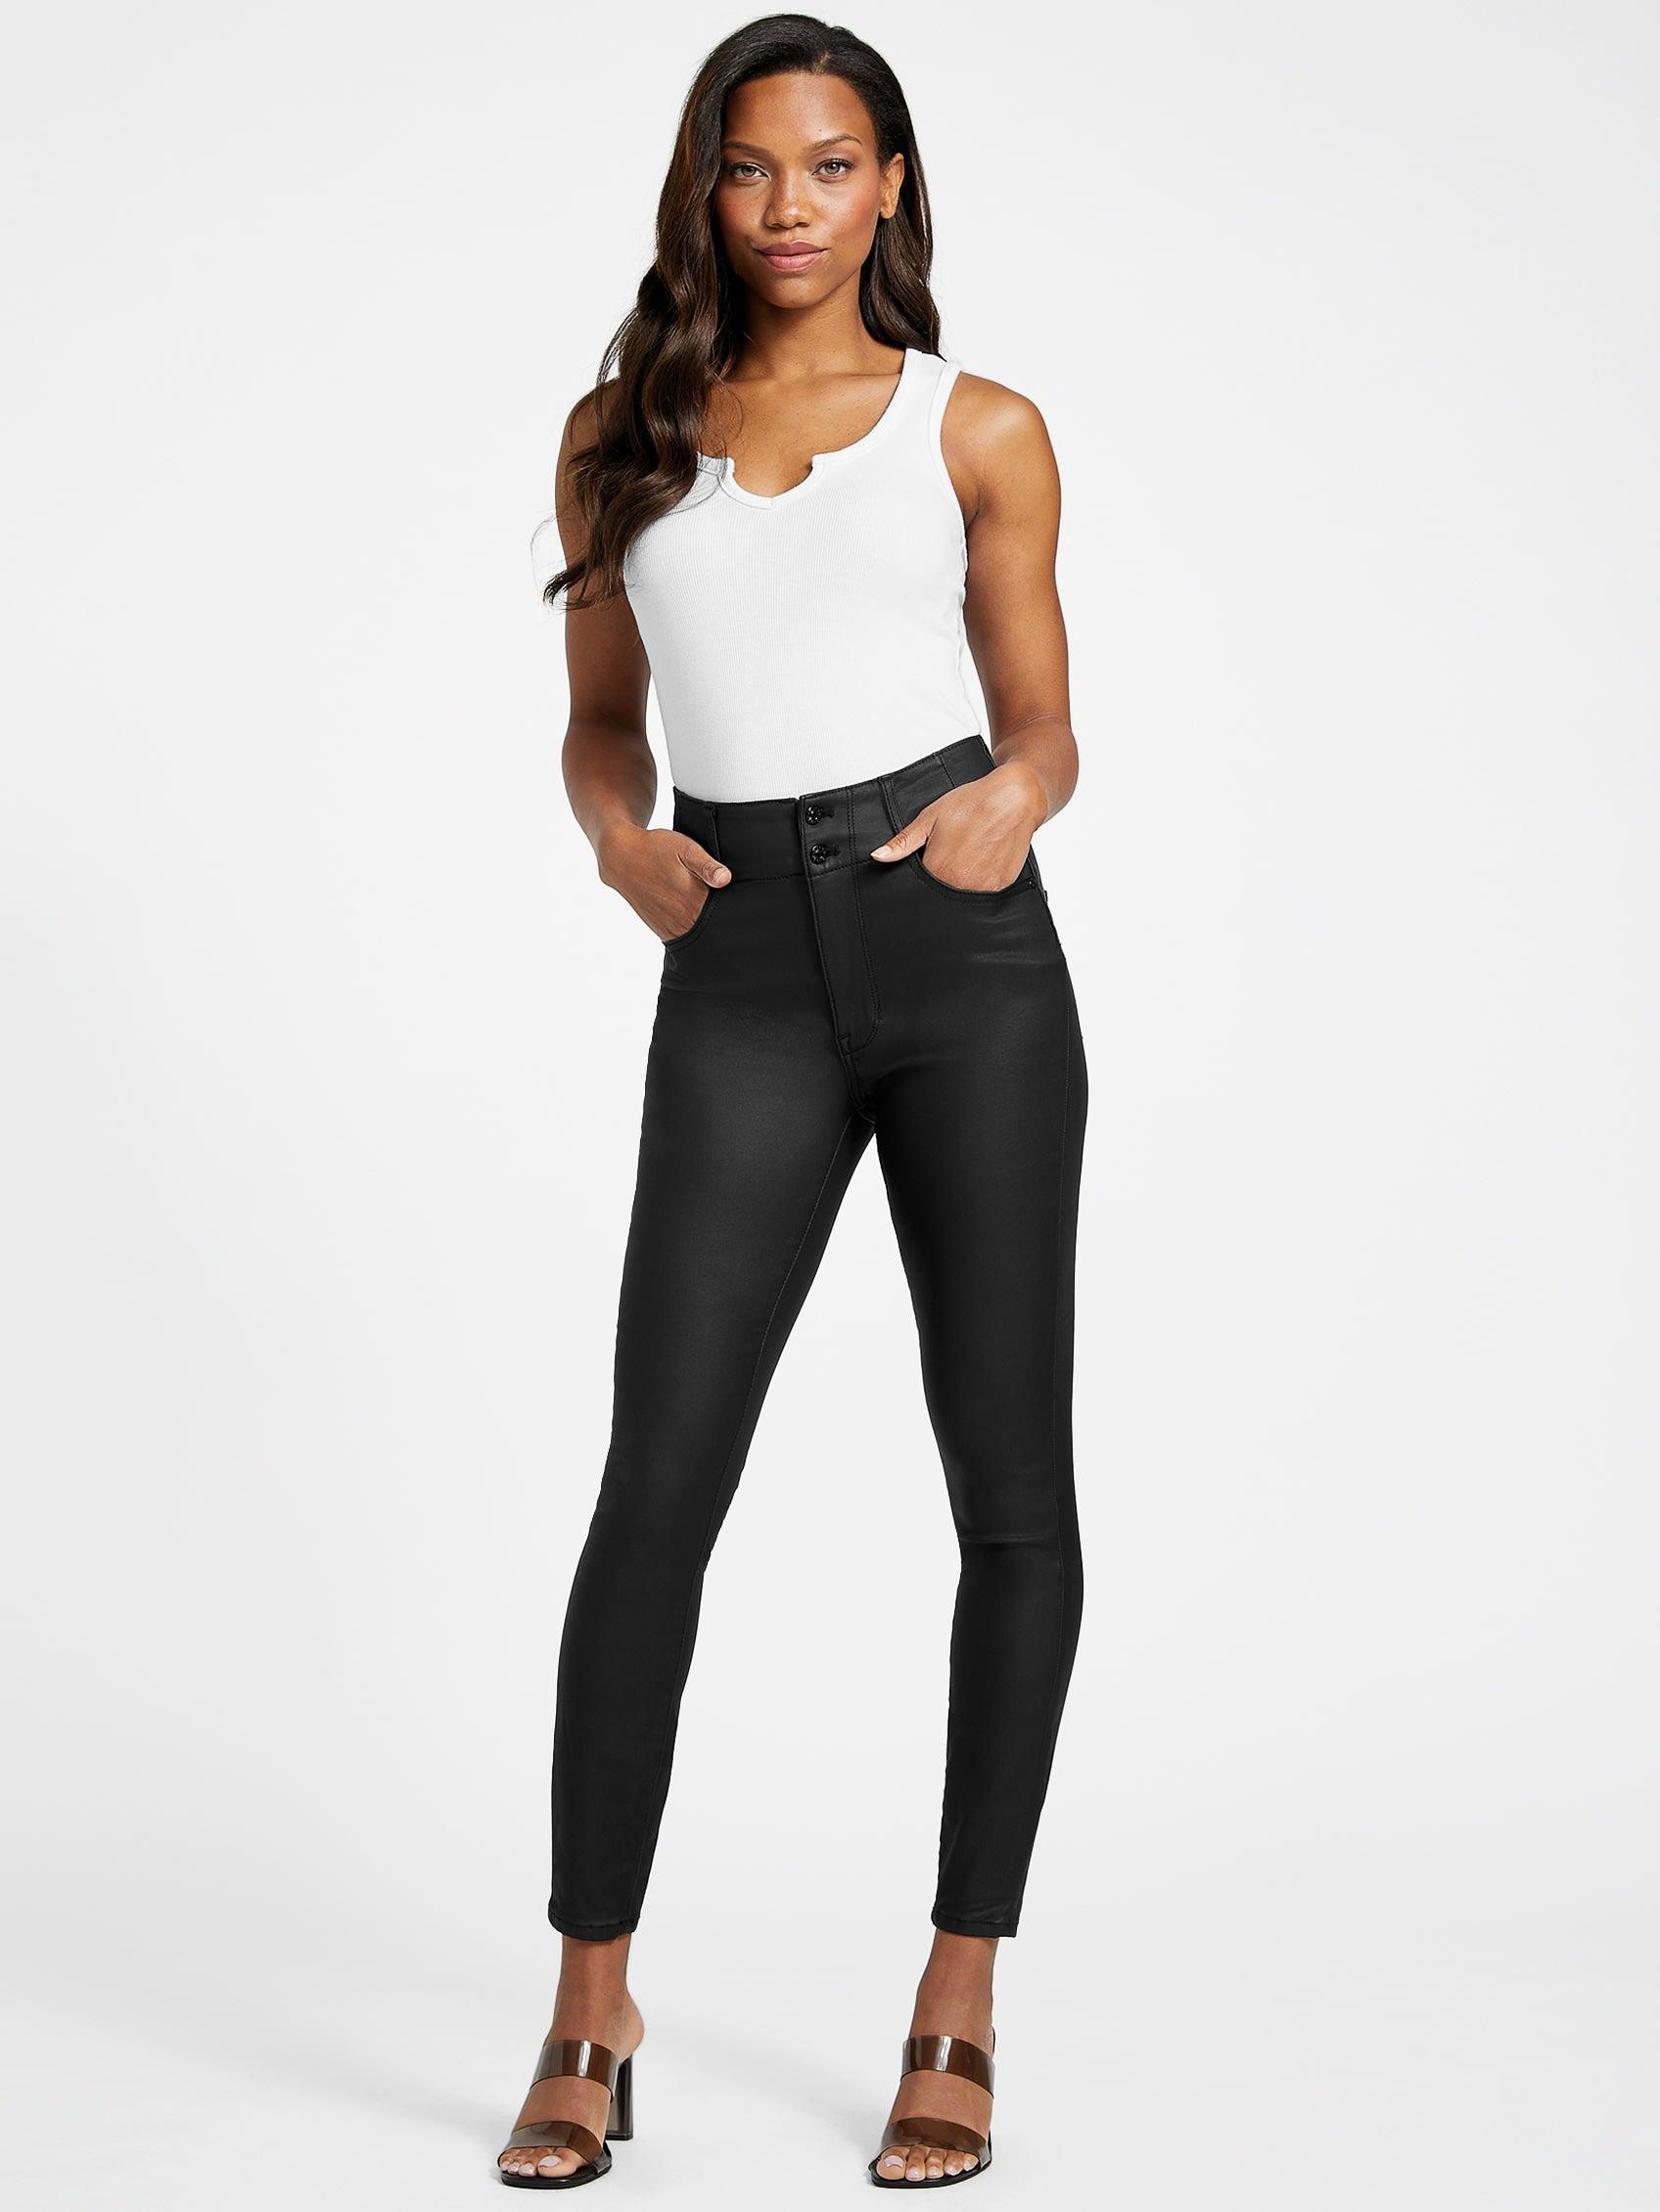 Guess Factory Salma High-rise Corset Skinny Jeans in Black | Lyst